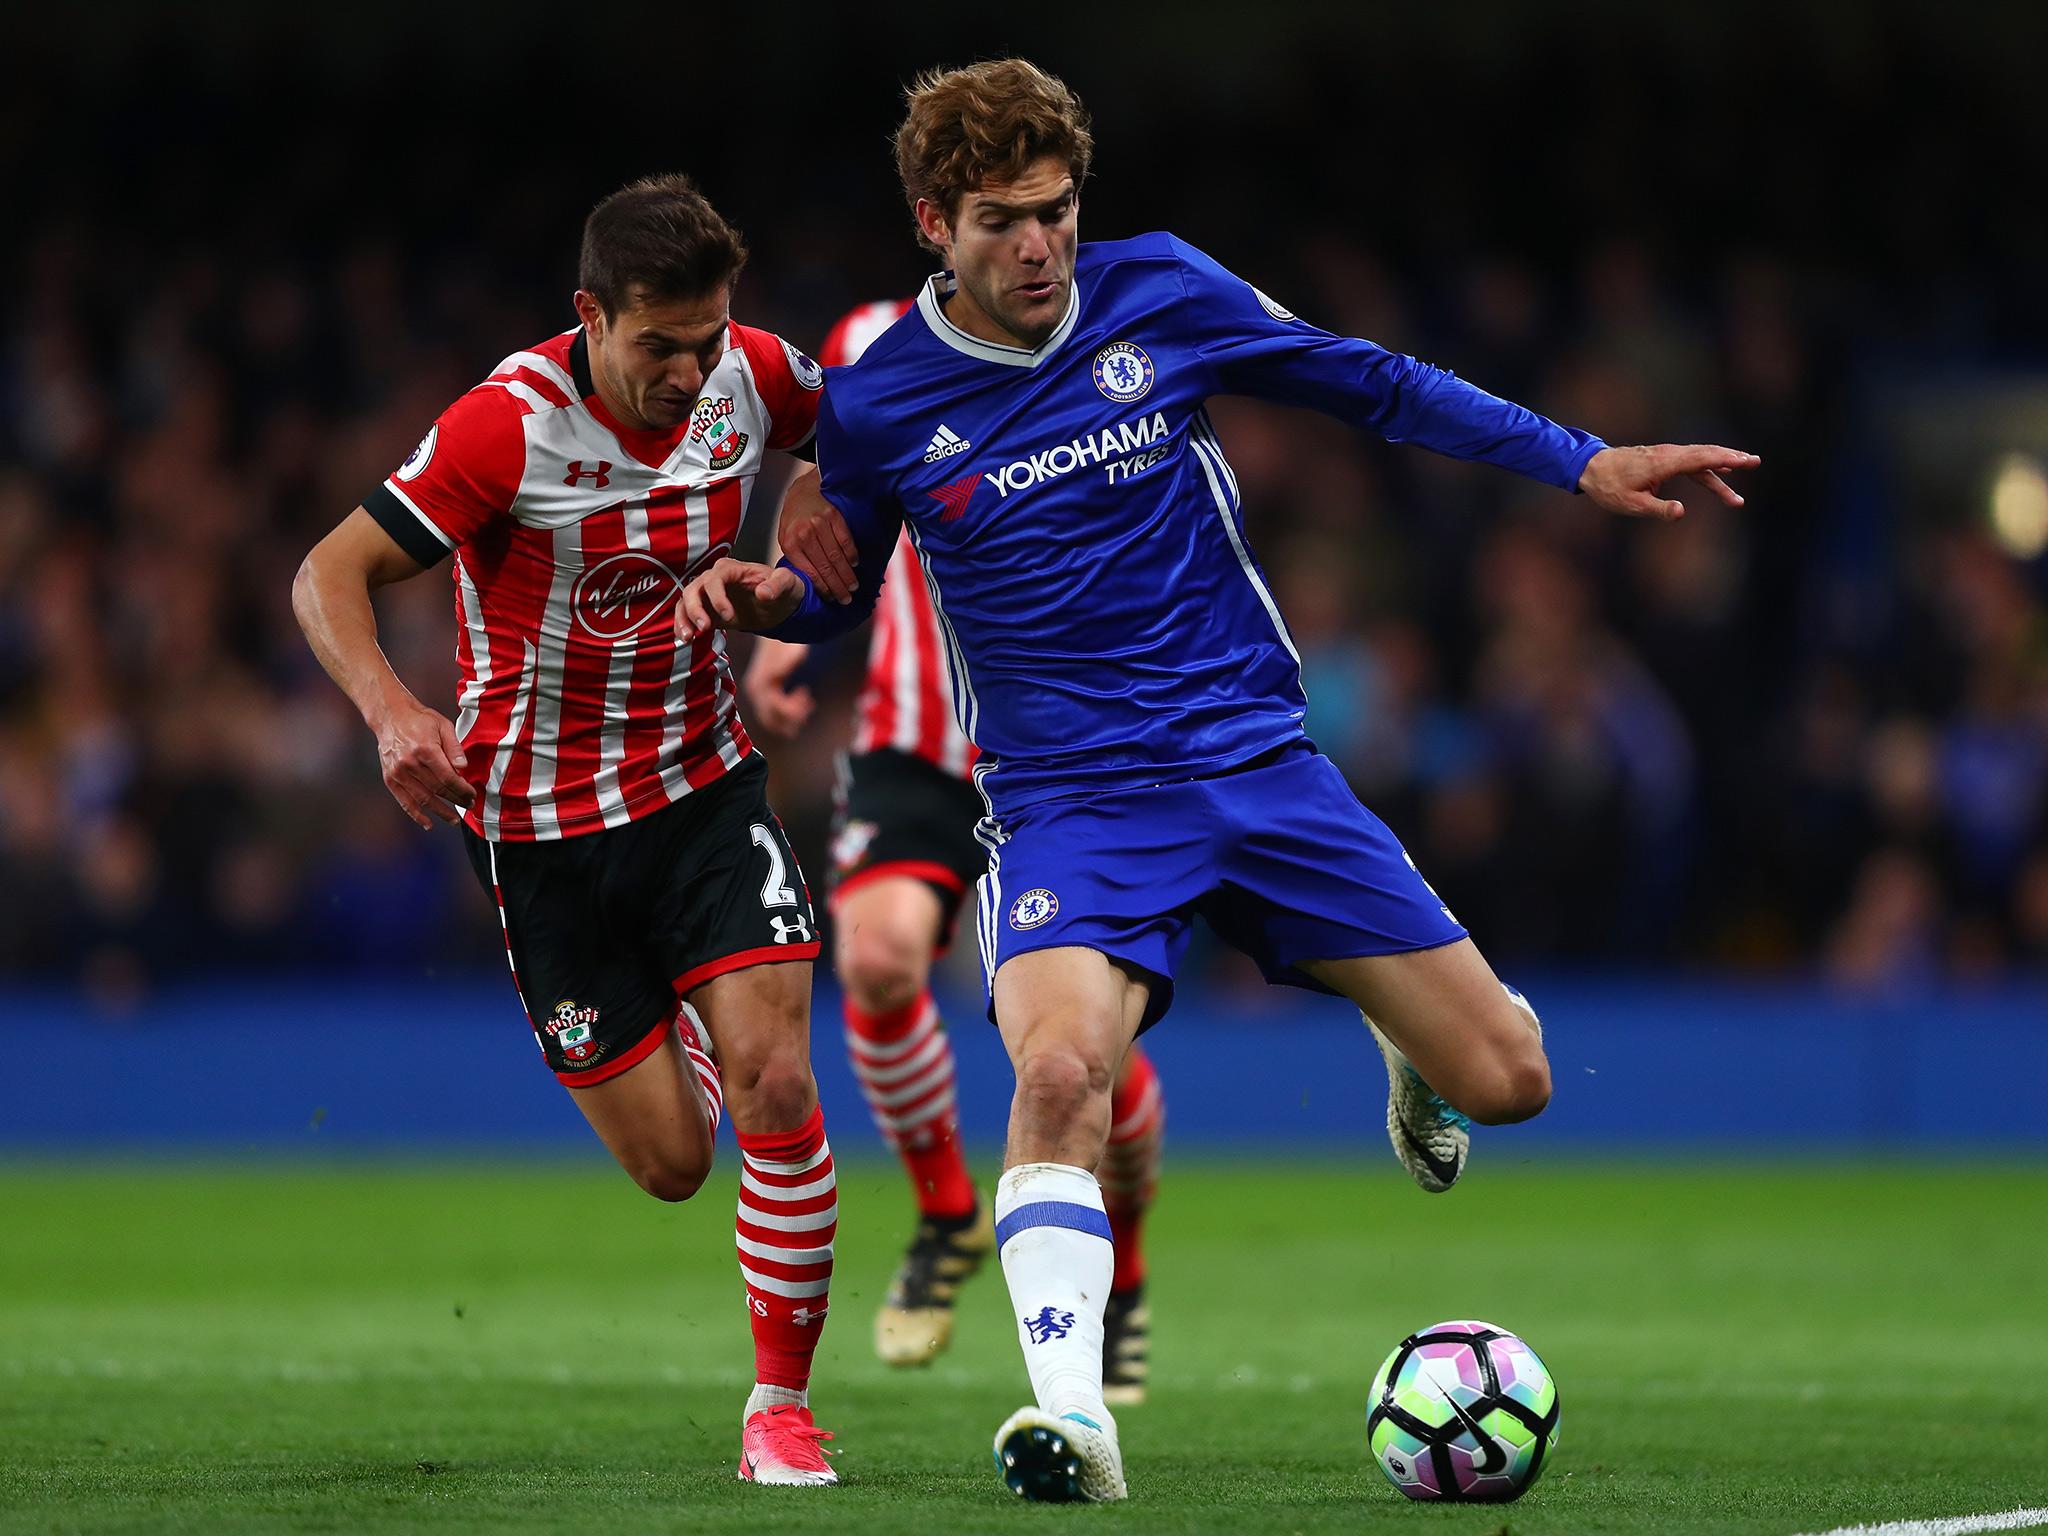 Marcos Alonso has proven to be an excellent acquisition